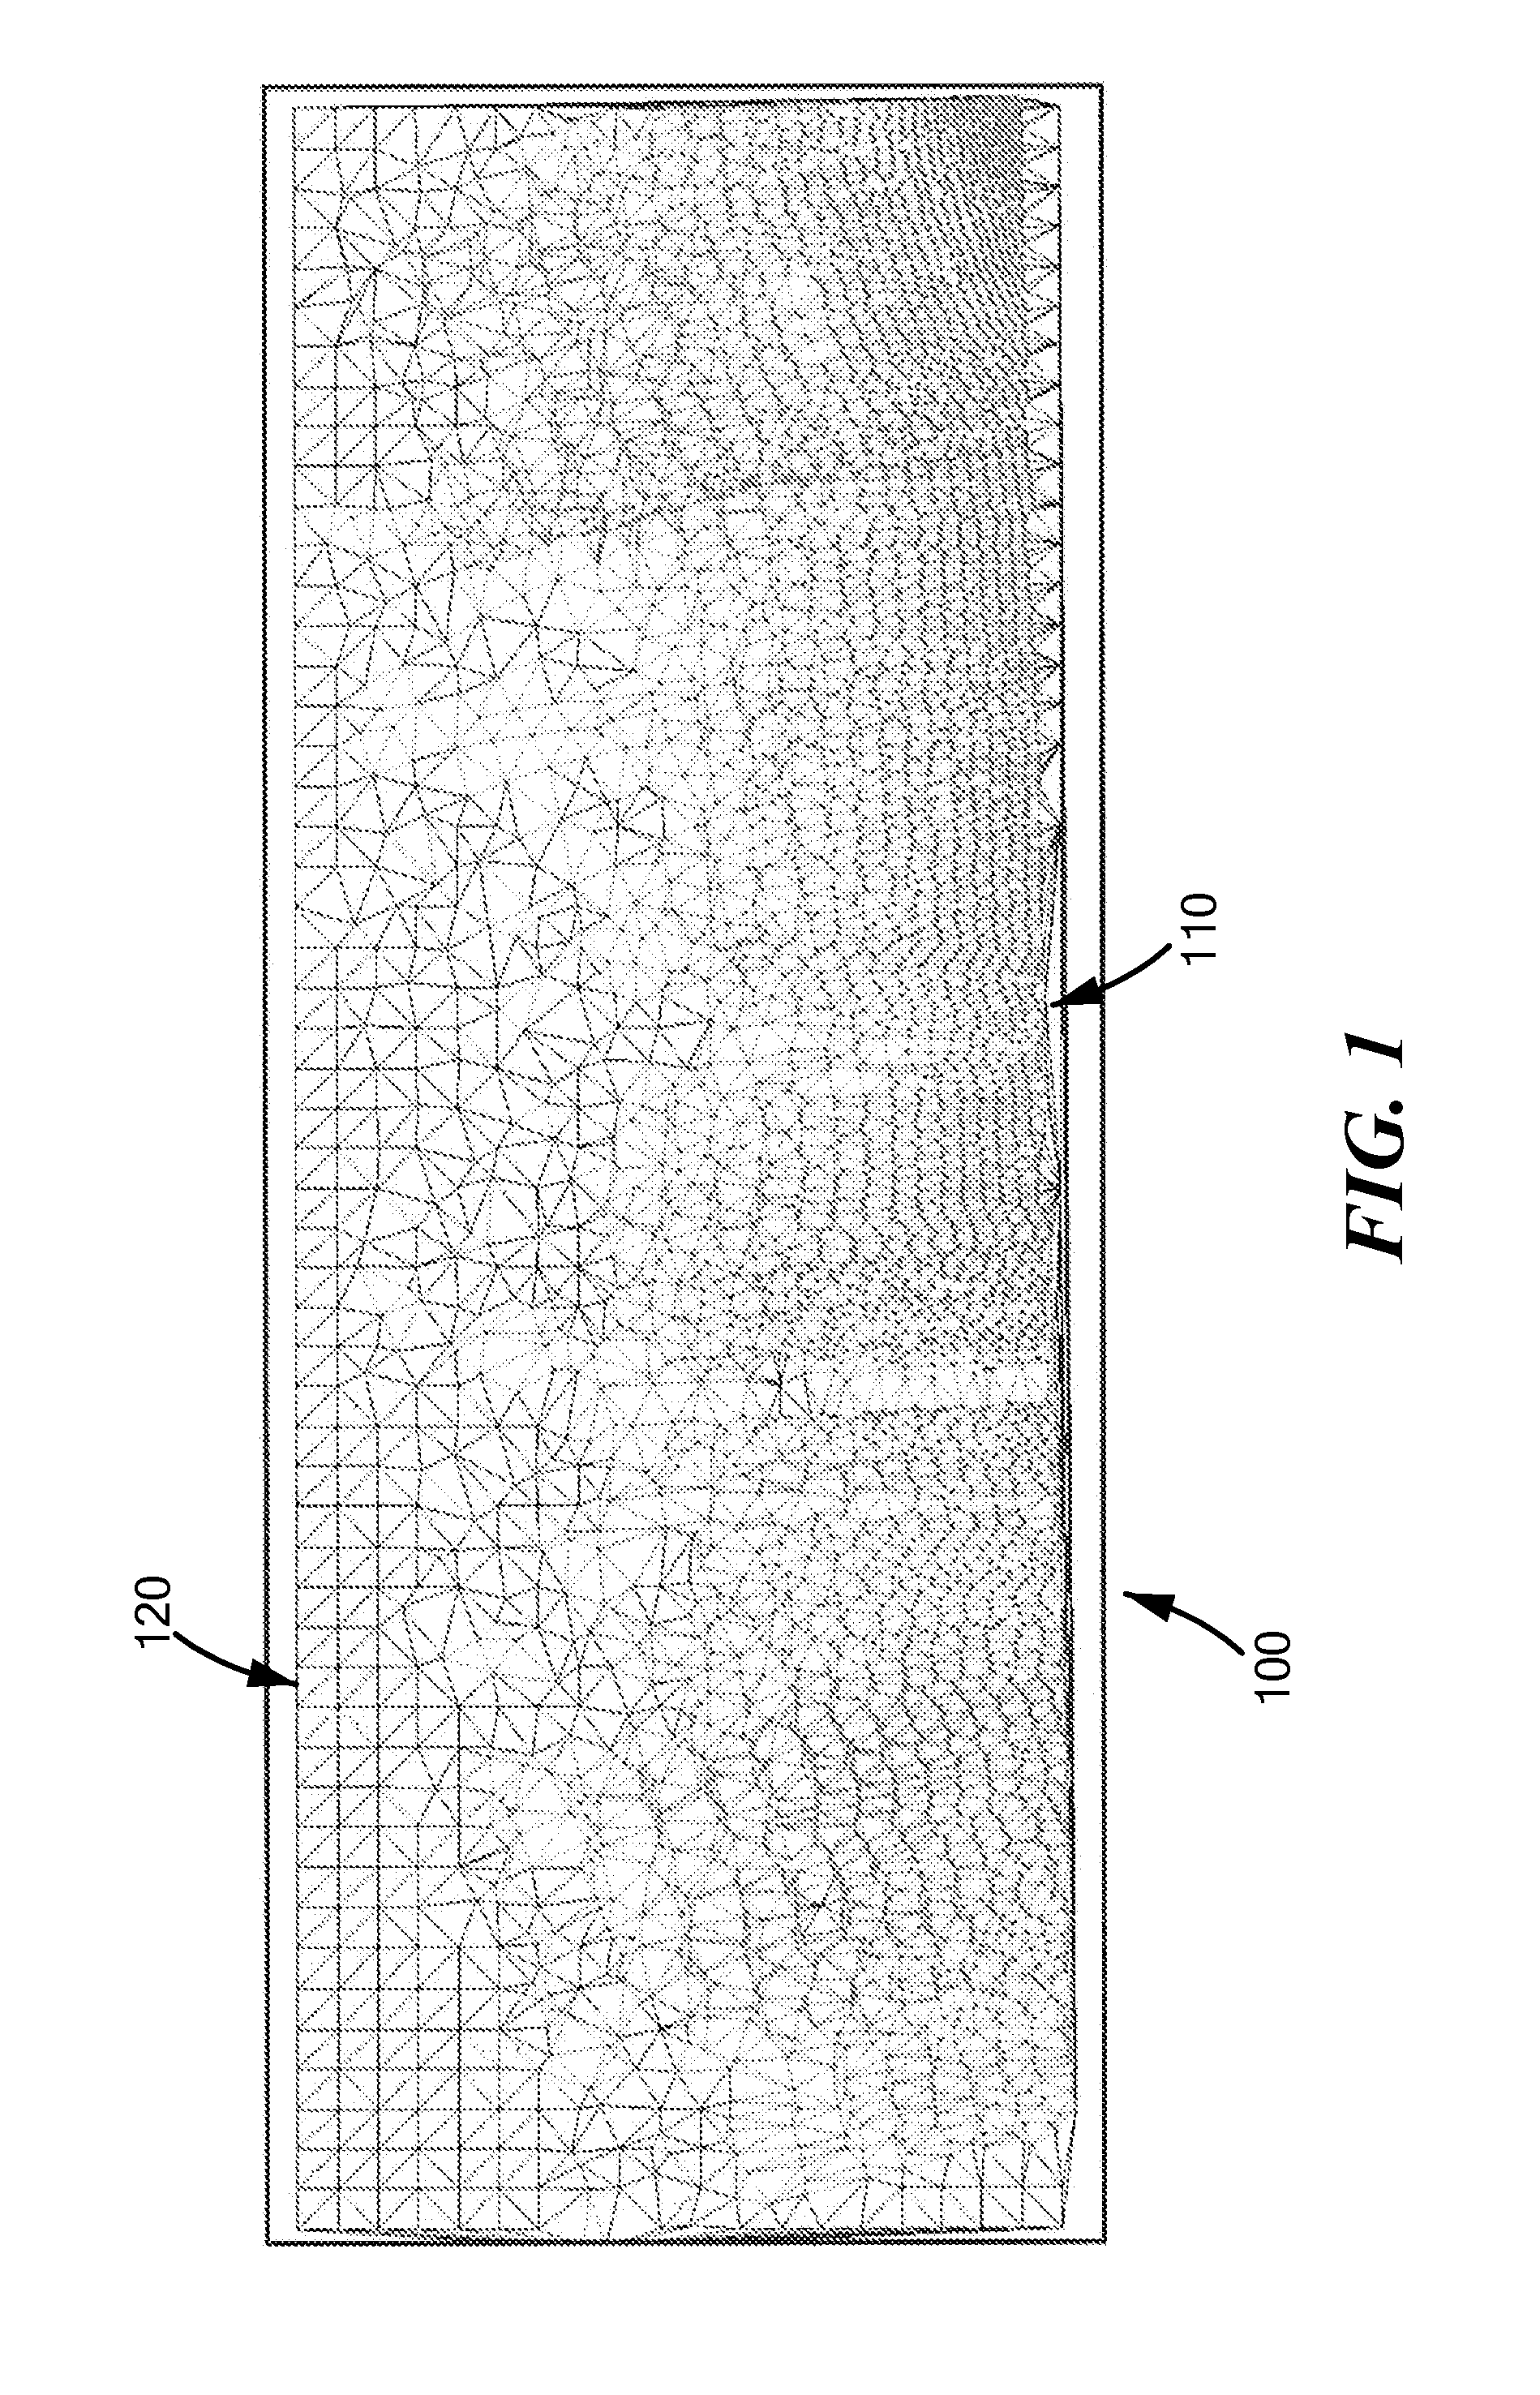 Systems and methods for generating a large scale polygonal mesh